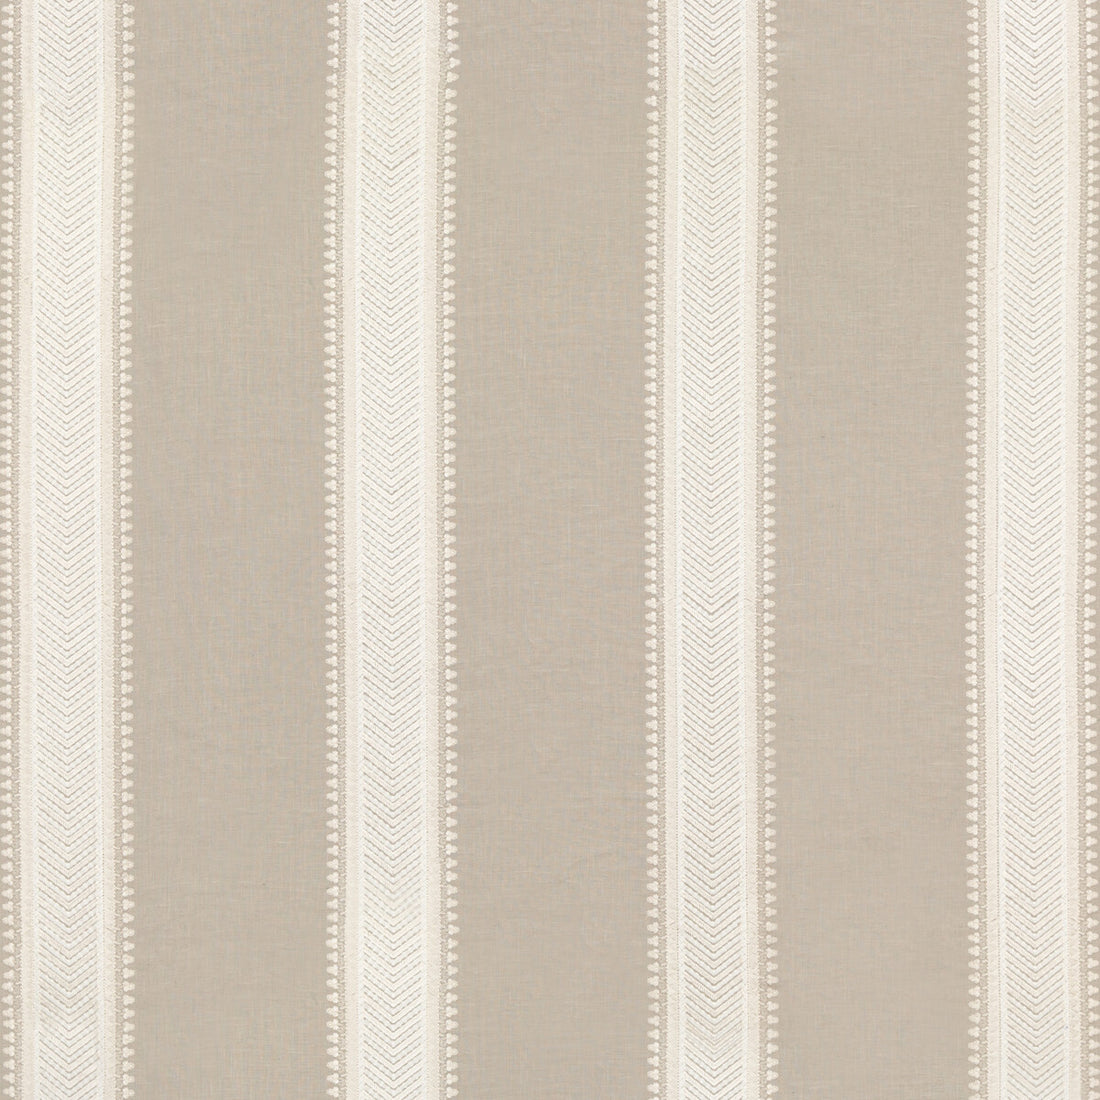 Kerris Stripe fabric in dove color - pattern BF10799.3.0 - by G P &amp; J Baker in the Artisan II collection